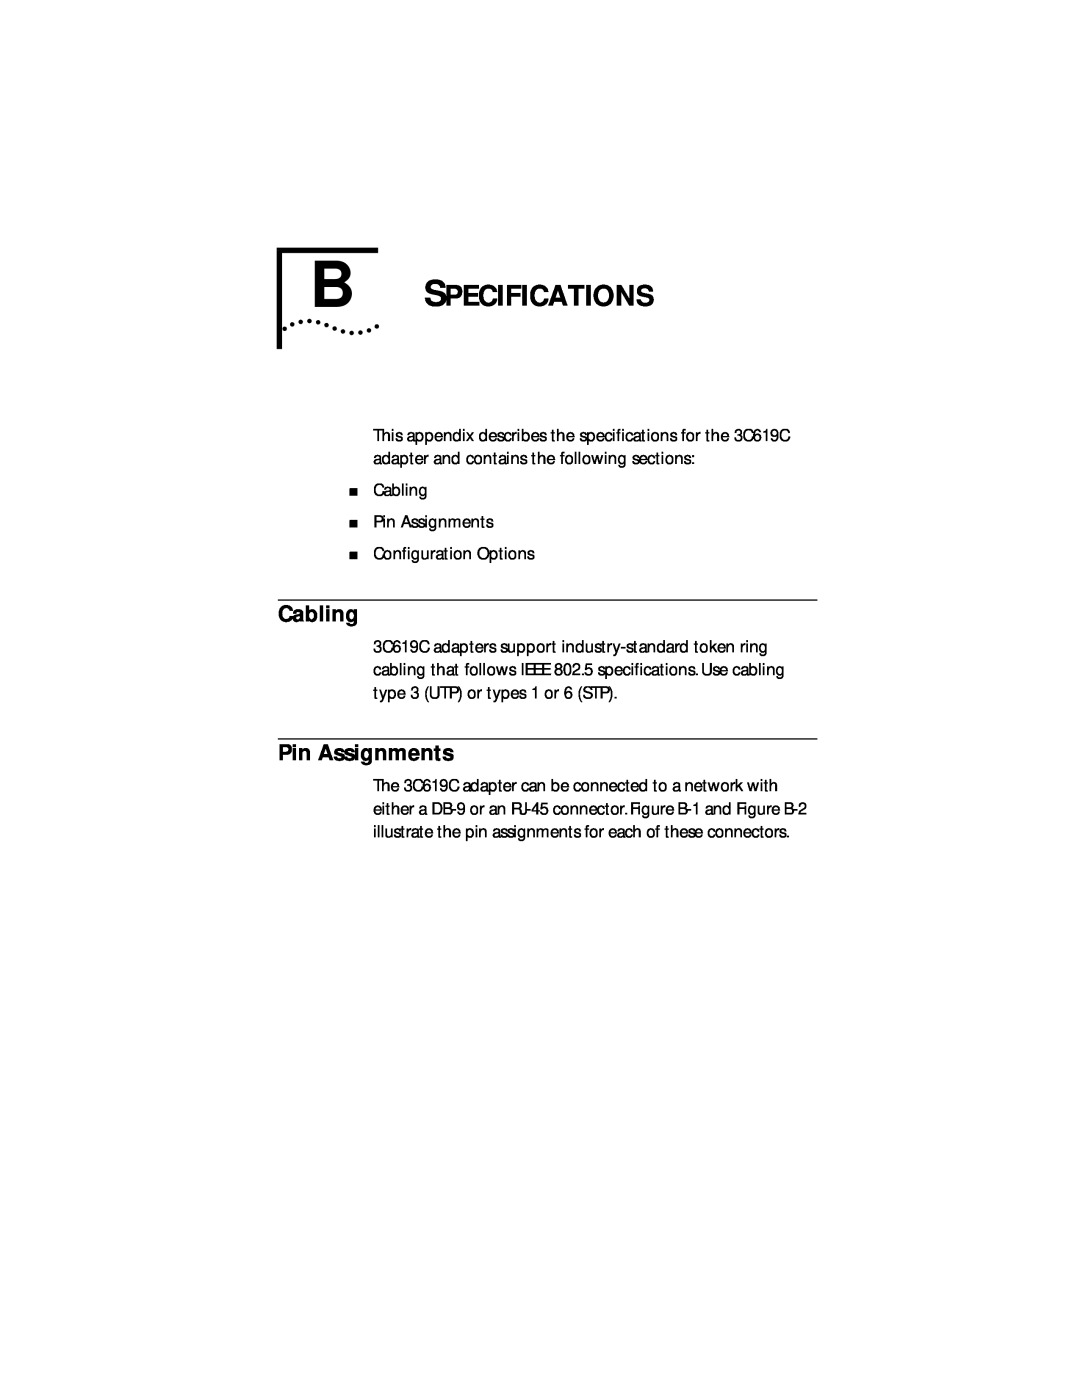 IBM 09-0572-000 manual B Specifications, Cabling, Pin Assignments 